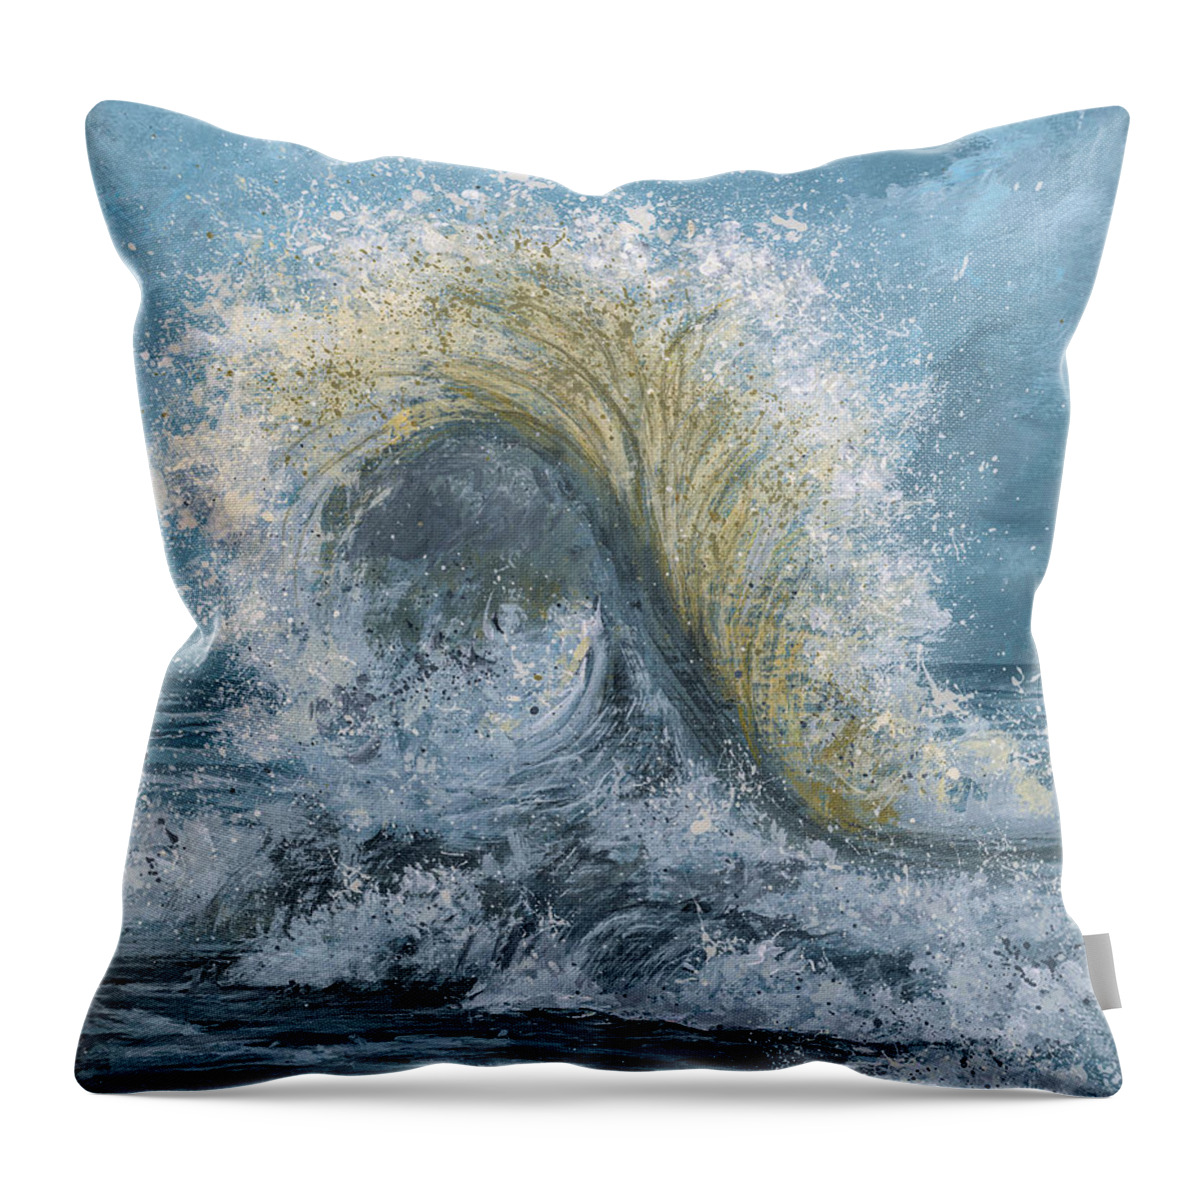 Seascape Throw Pillow featuring the painting Ocean's Energy by Darice Machel McGuire